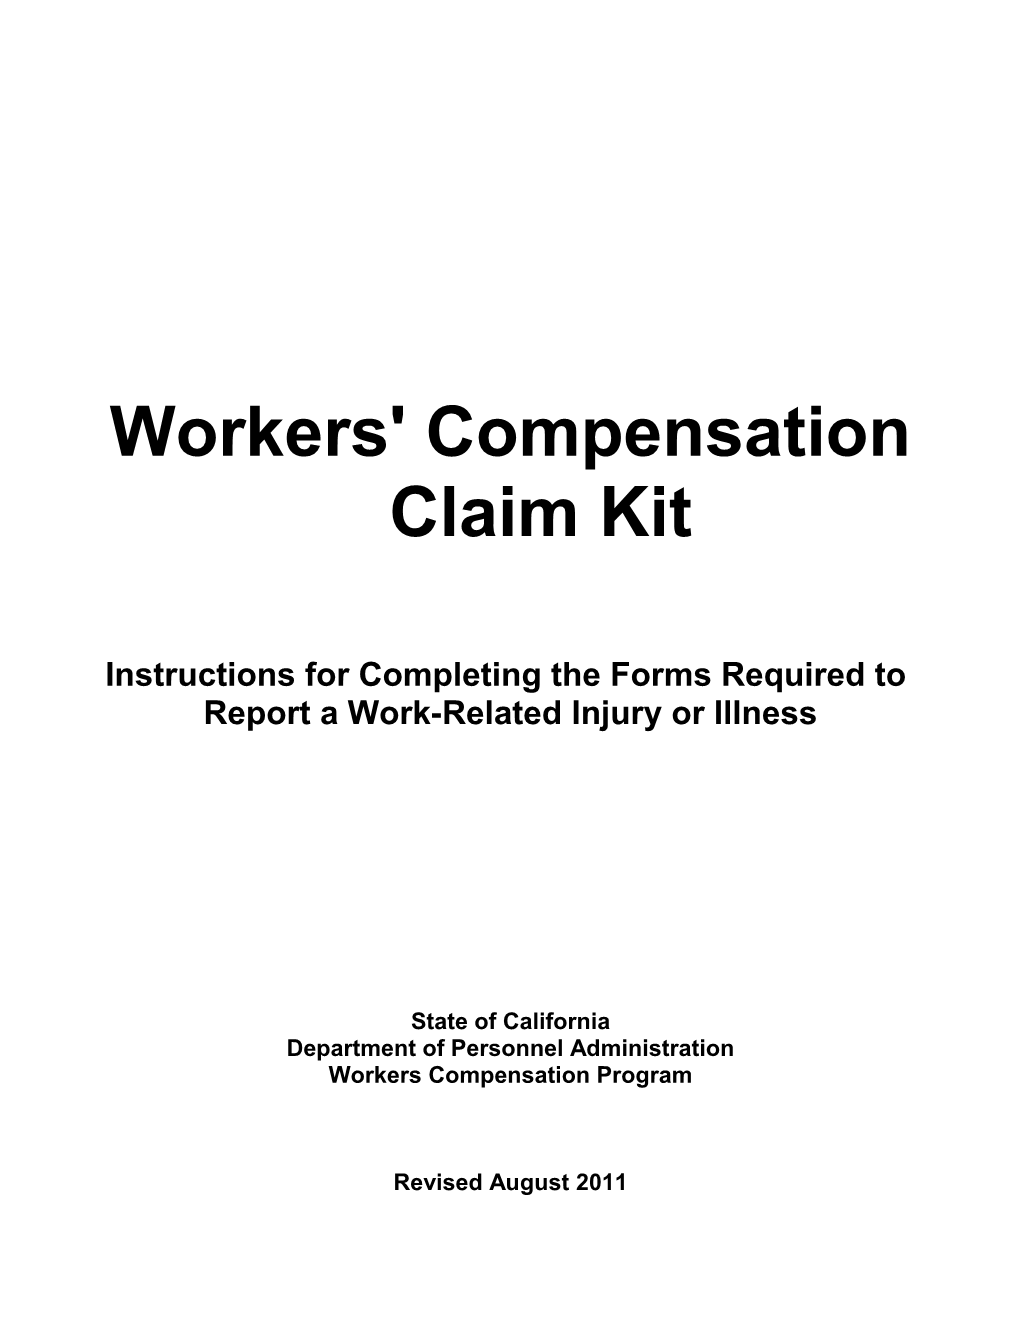 Workers' Compensation Claim Kit